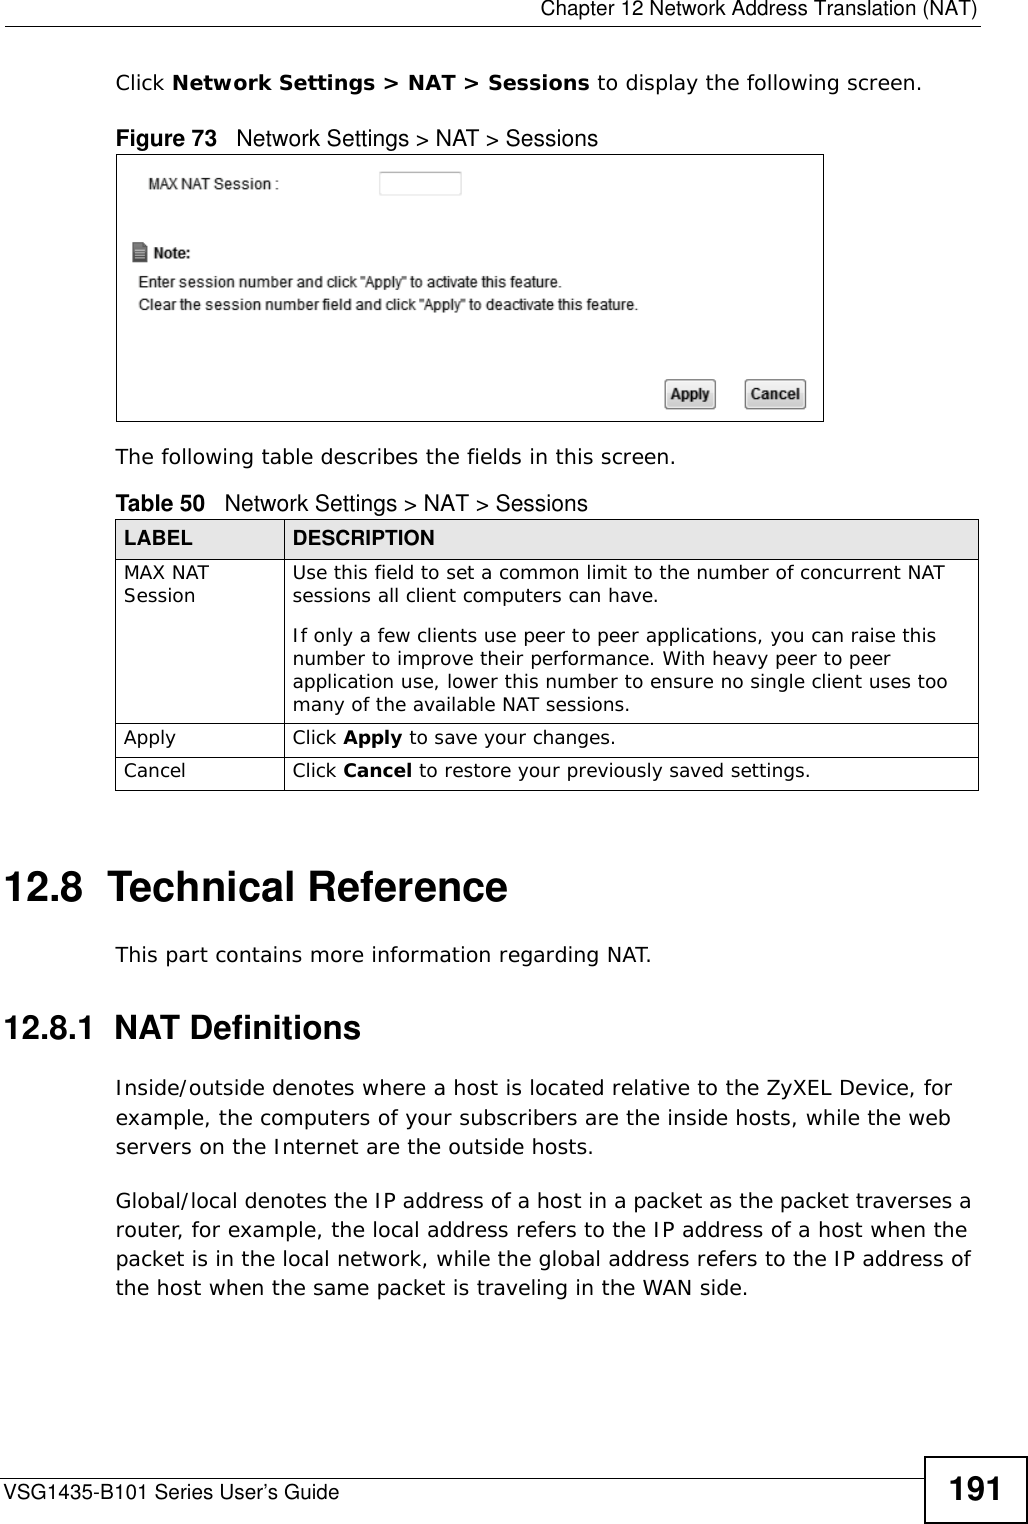  Chapter 12 Network Address Translation (NAT)VSG1435-B101 Series User’s Guide 191Click Network Settings &gt; NAT &gt; Sessions to display the following screen. Figure 73   Network Settings &gt; NAT &gt; SessionsThe following table describes the fields in this screen.12.8  Technical ReferenceThis part contains more information regarding NAT.12.8.1  NAT DefinitionsInside/outside denotes where a host is located relative to the ZyXEL Device, for example, the computers of your subscribers are the inside hosts, while the web servers on the Internet are the outside hosts. Global/local denotes the IP address of a host in a packet as the packet traverses a router, for example, the local address refers to the IP address of a host when the packet is in the local network, while the global address refers to the IP address of the host when the same packet is traveling in the WAN side. Table 50   Network Settings &gt; NAT &gt; SessionsLABEL DESCRIPTIONMAX NAT Session Use this field to set a common limit to the number of concurrent NAT sessions all client computers can have.If only a few clients use peer to peer applications, you can raise this number to improve their performance. With heavy peer to peer application use, lower this number to ensure no single client uses too many of the available NAT sessions.Apply Click Apply to save your changes.Cancel Click Cancel to restore your previously saved settings.